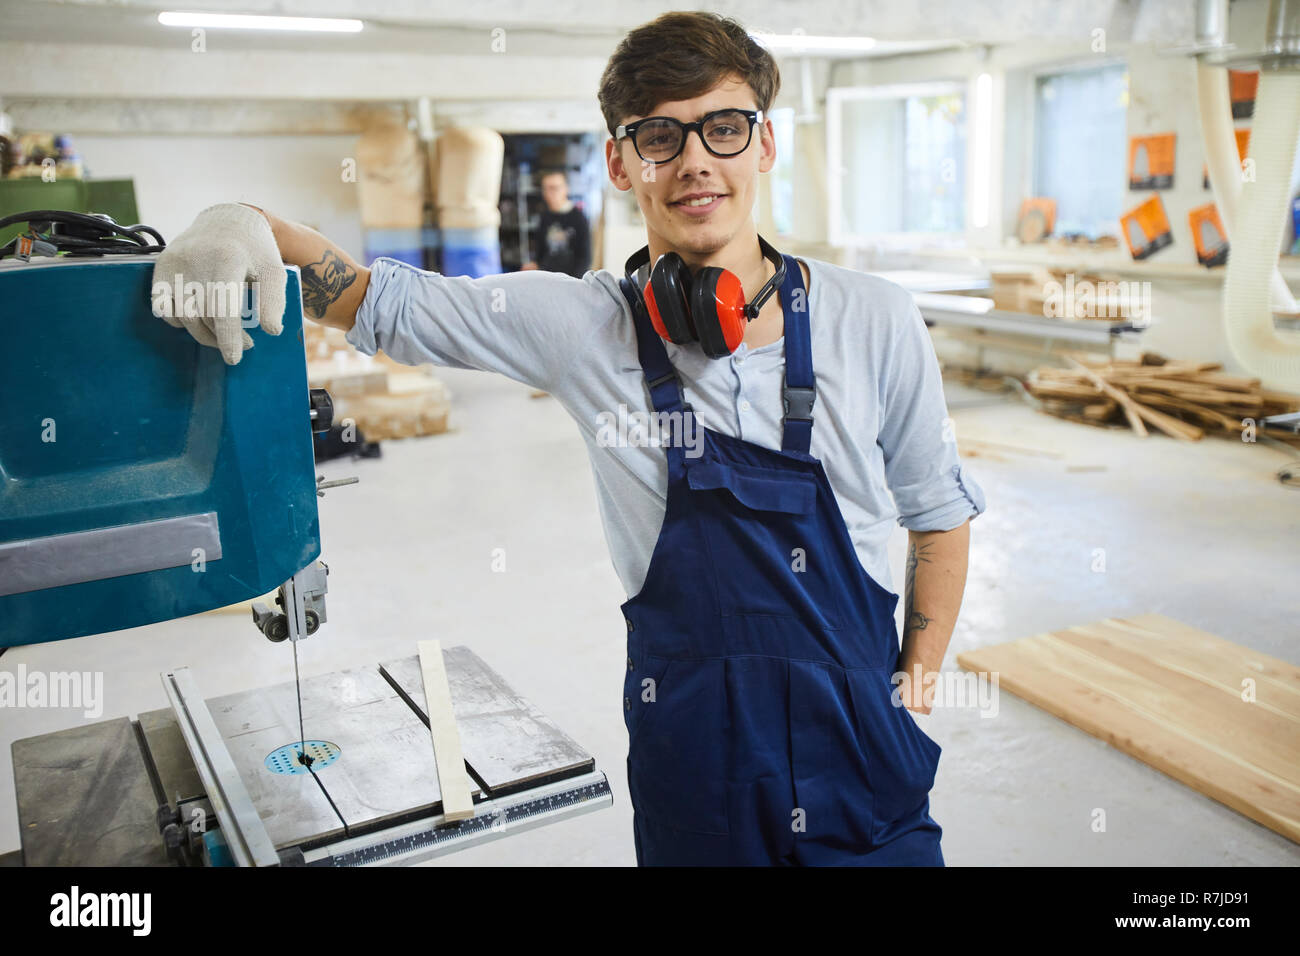 Confident carpentry specialist in workshop Stock Photo